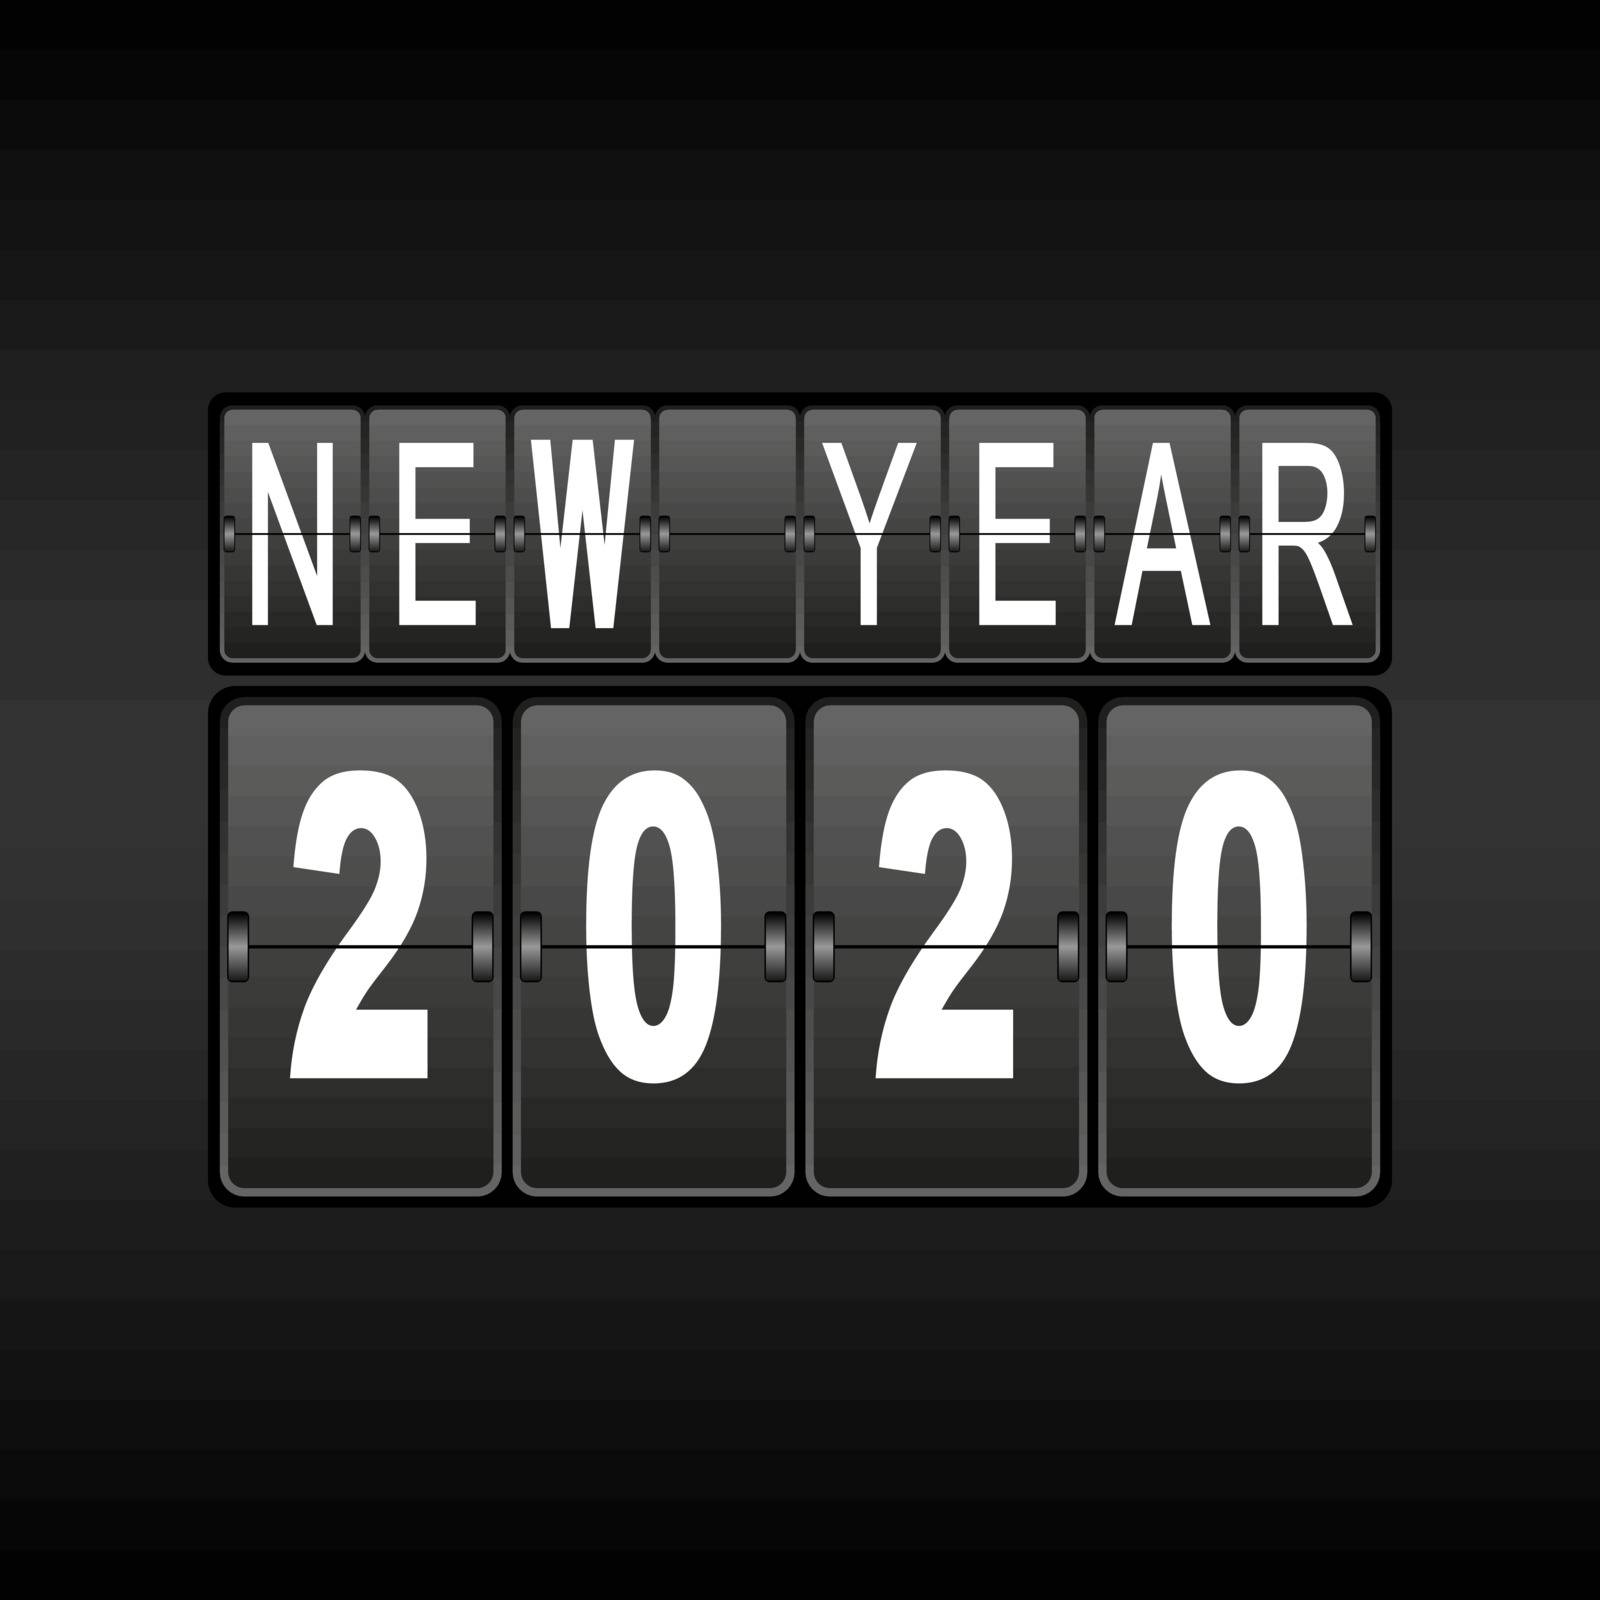 Mechanical scoreboard with the inscription New year 2020 by Grommik